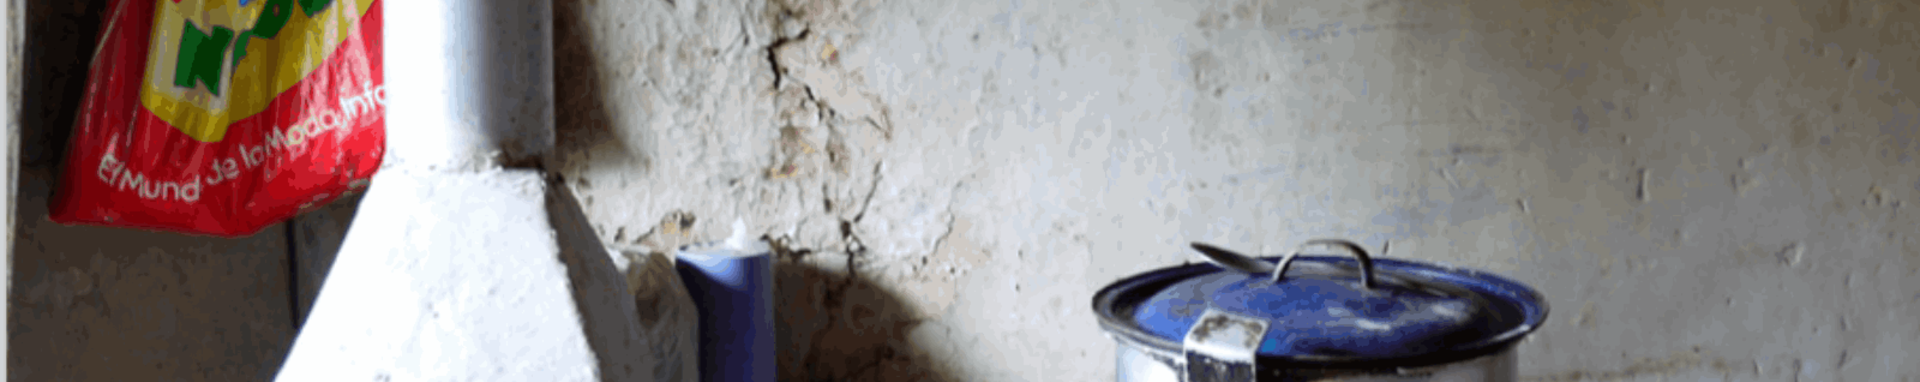 Clean Cookstoves in Honduras